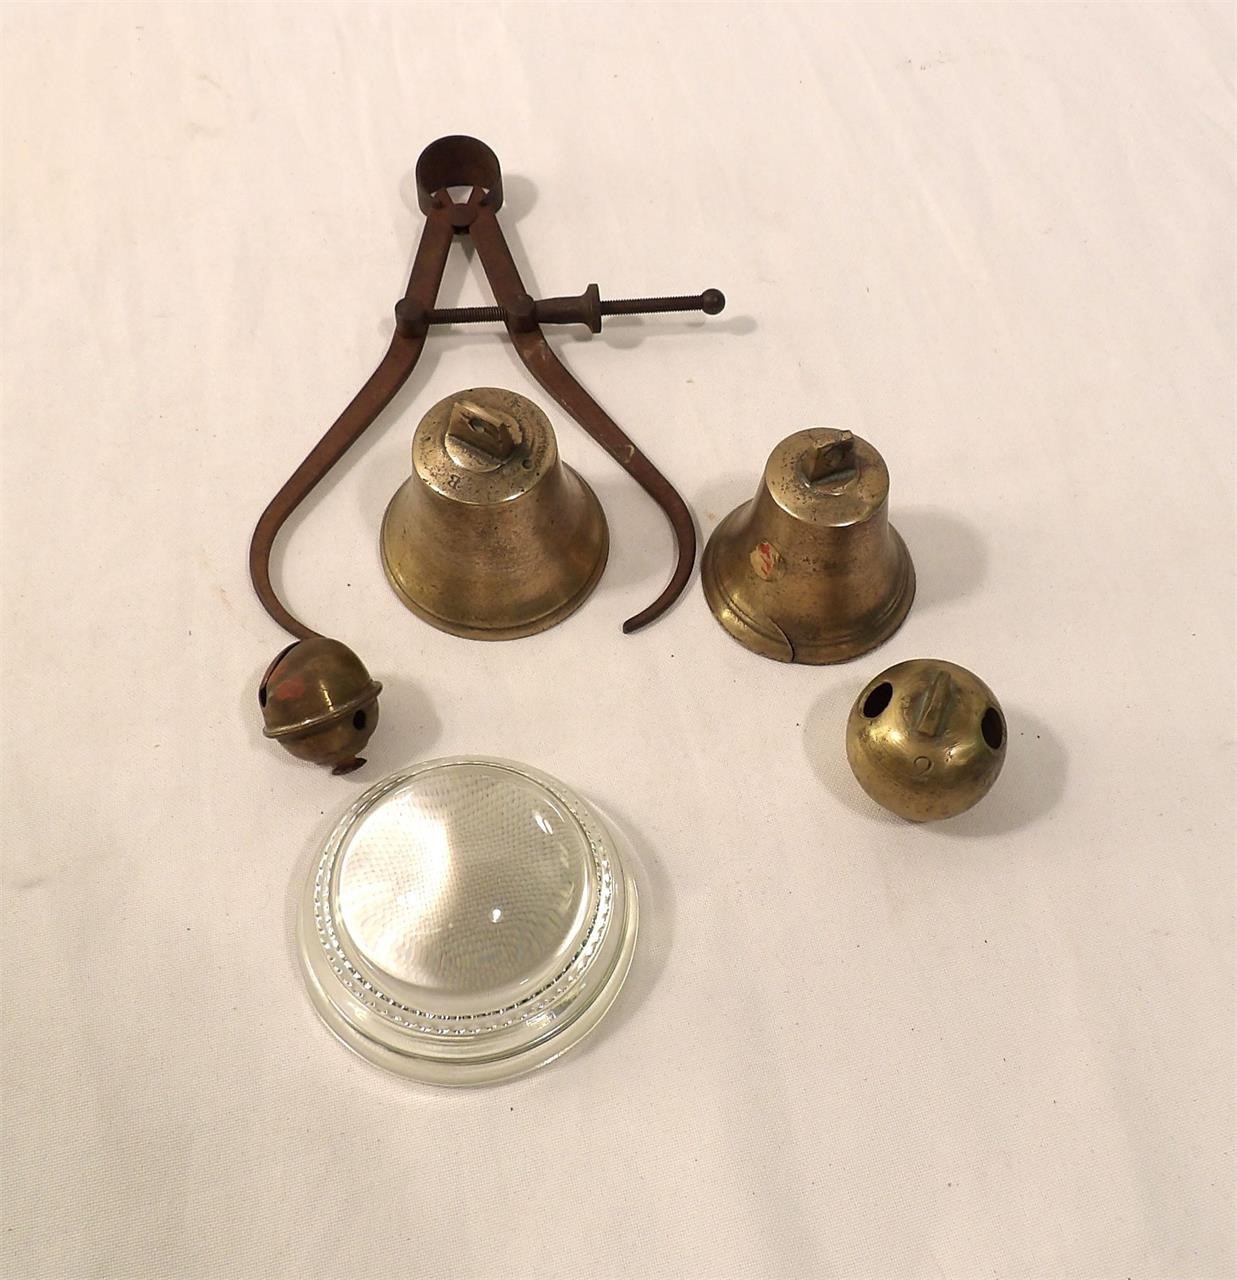 Antique Bells, Magnifying Paperweight, Measuring